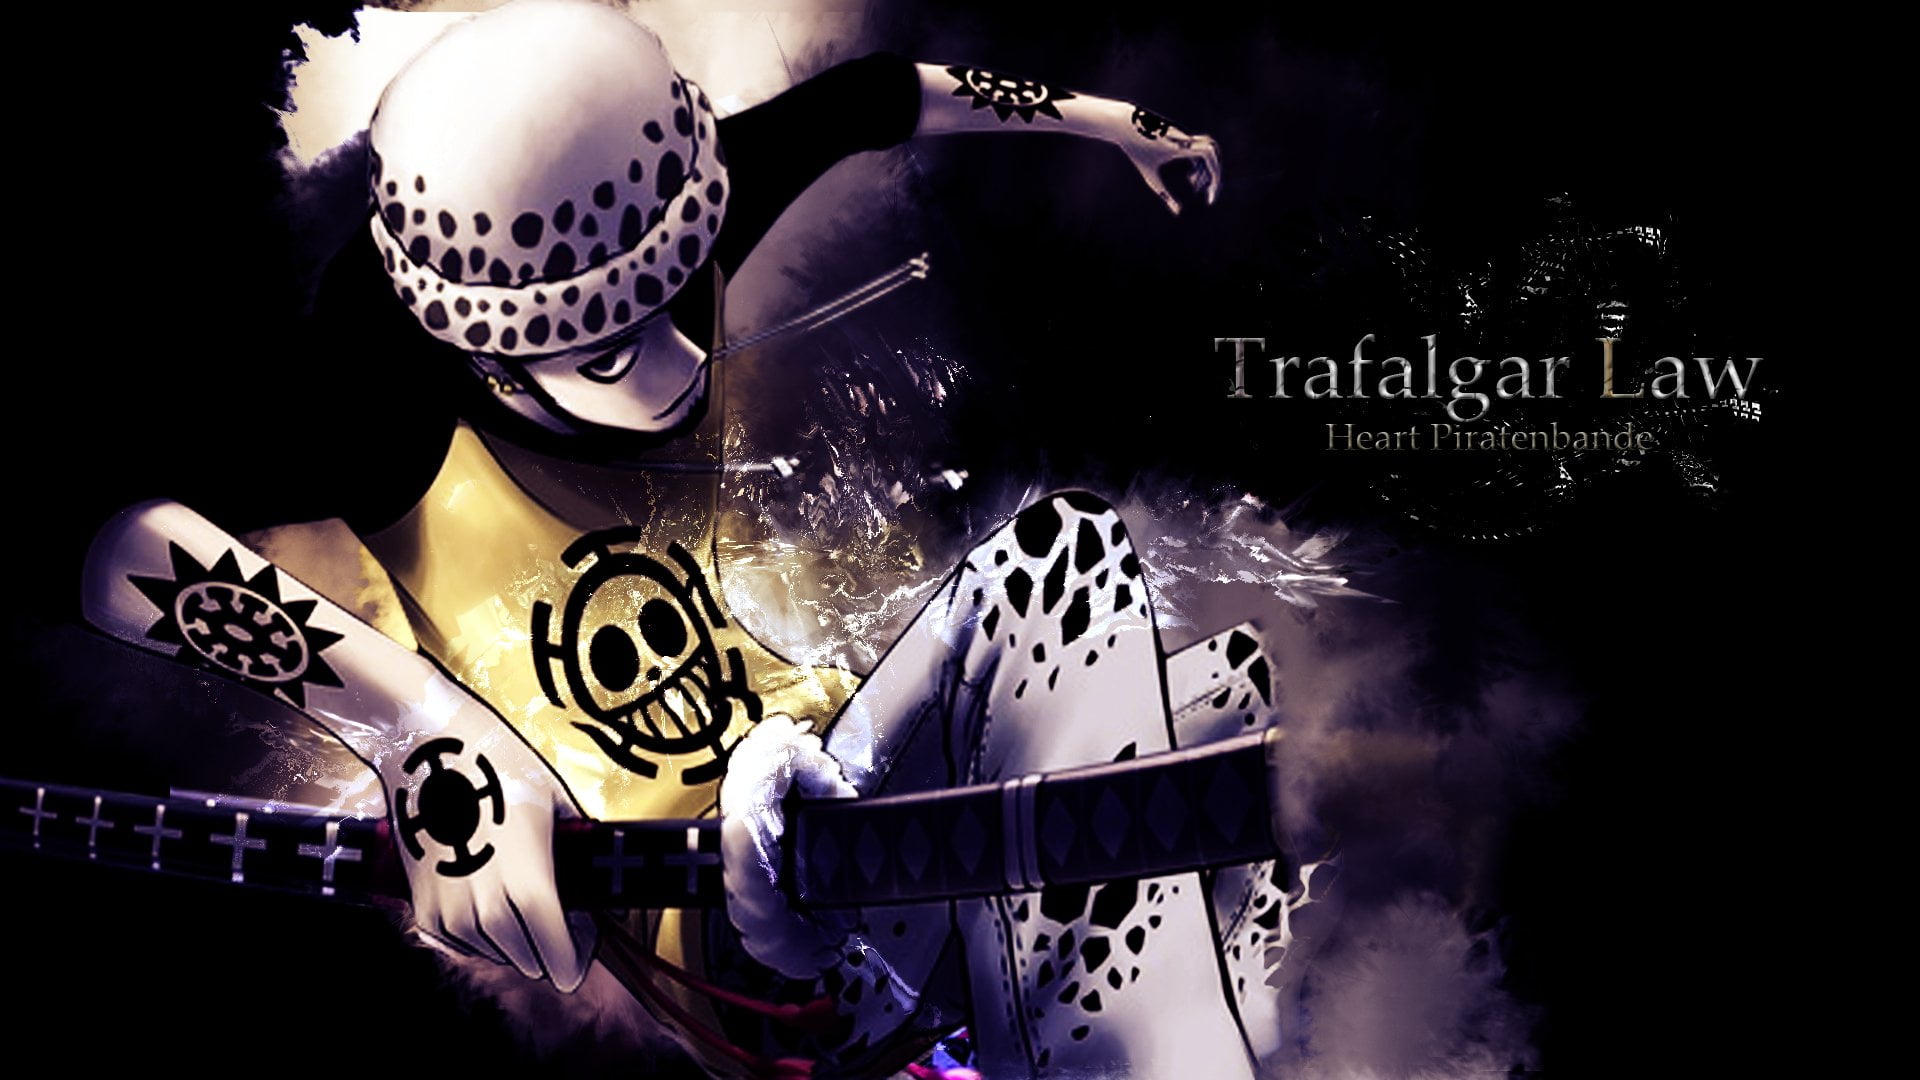 Trafalgar Law illustration, Anime, One Piece, indoors, text, one person